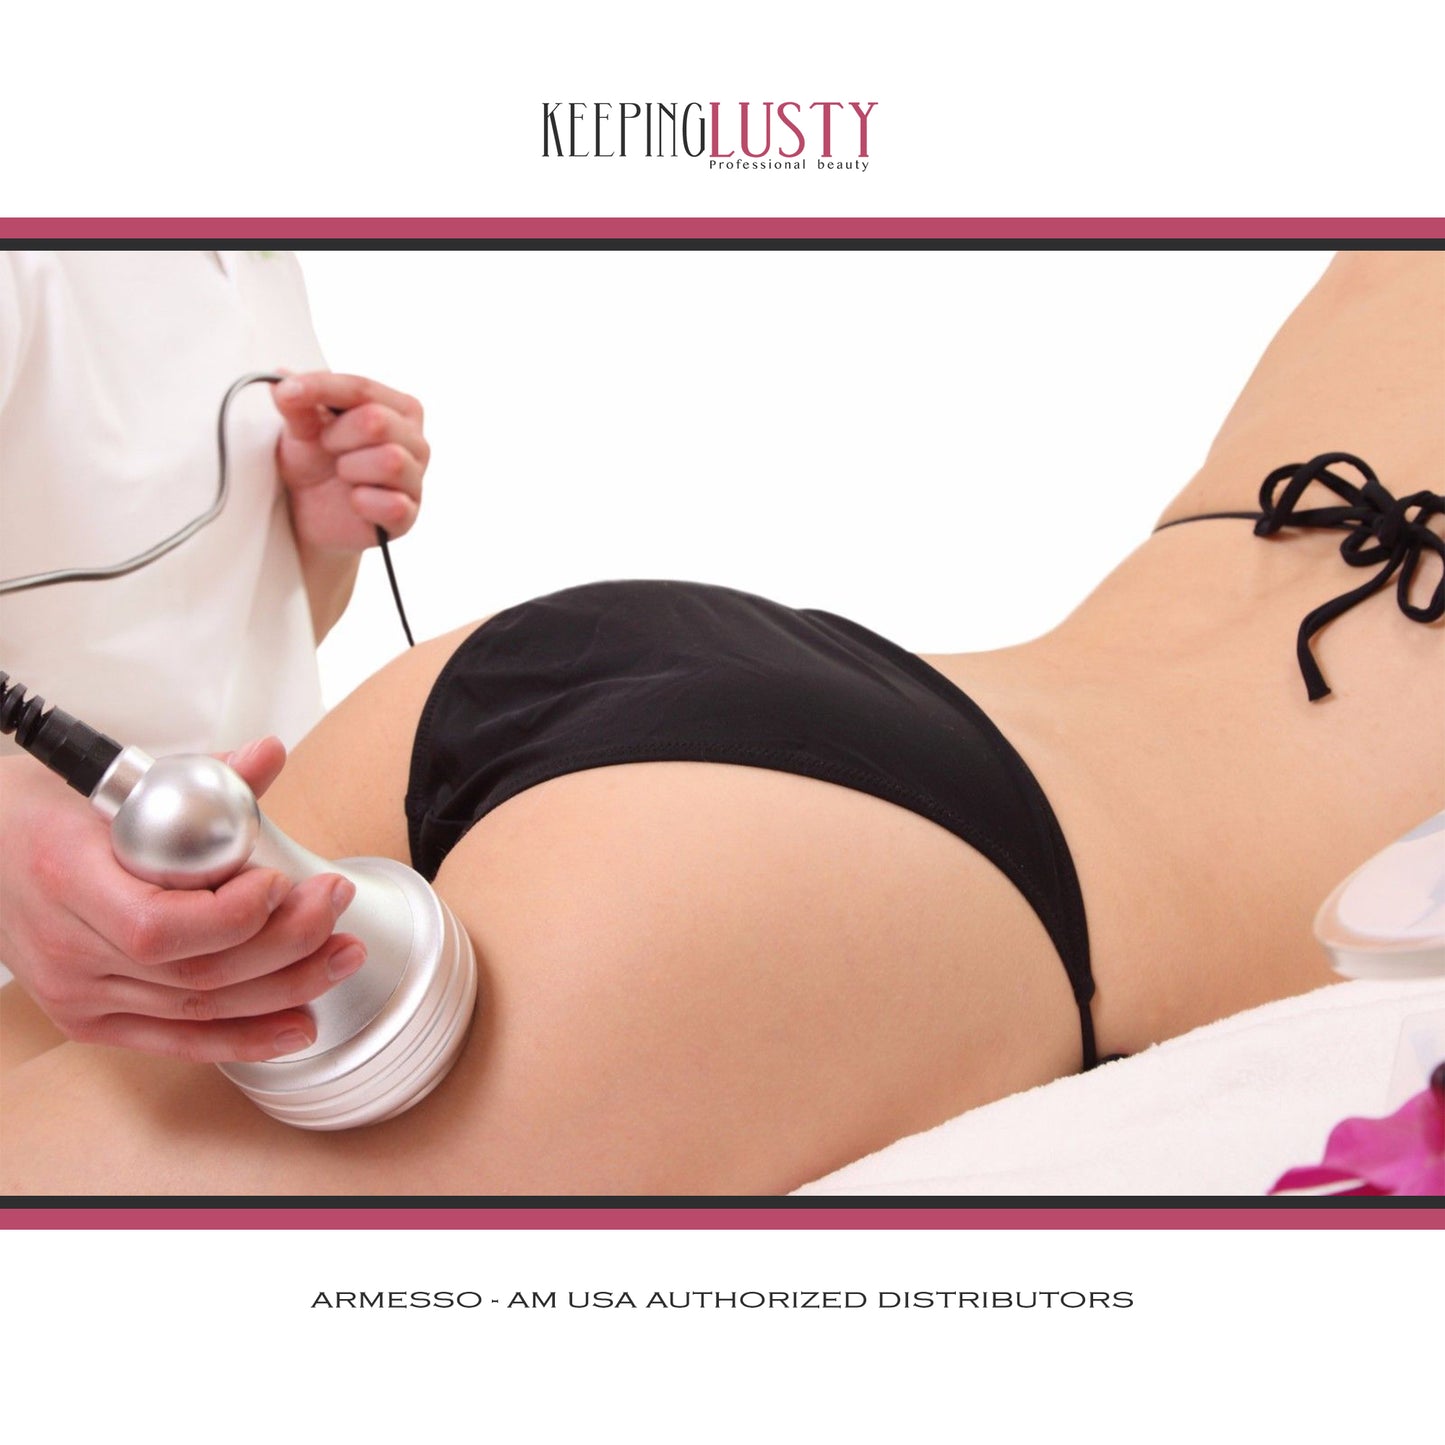 Load image into Gallery viewer, Armesso-AM Sellulit (Anti-Cellulite Solution) | Mesotherapy Serum | - Keeping Lusty
